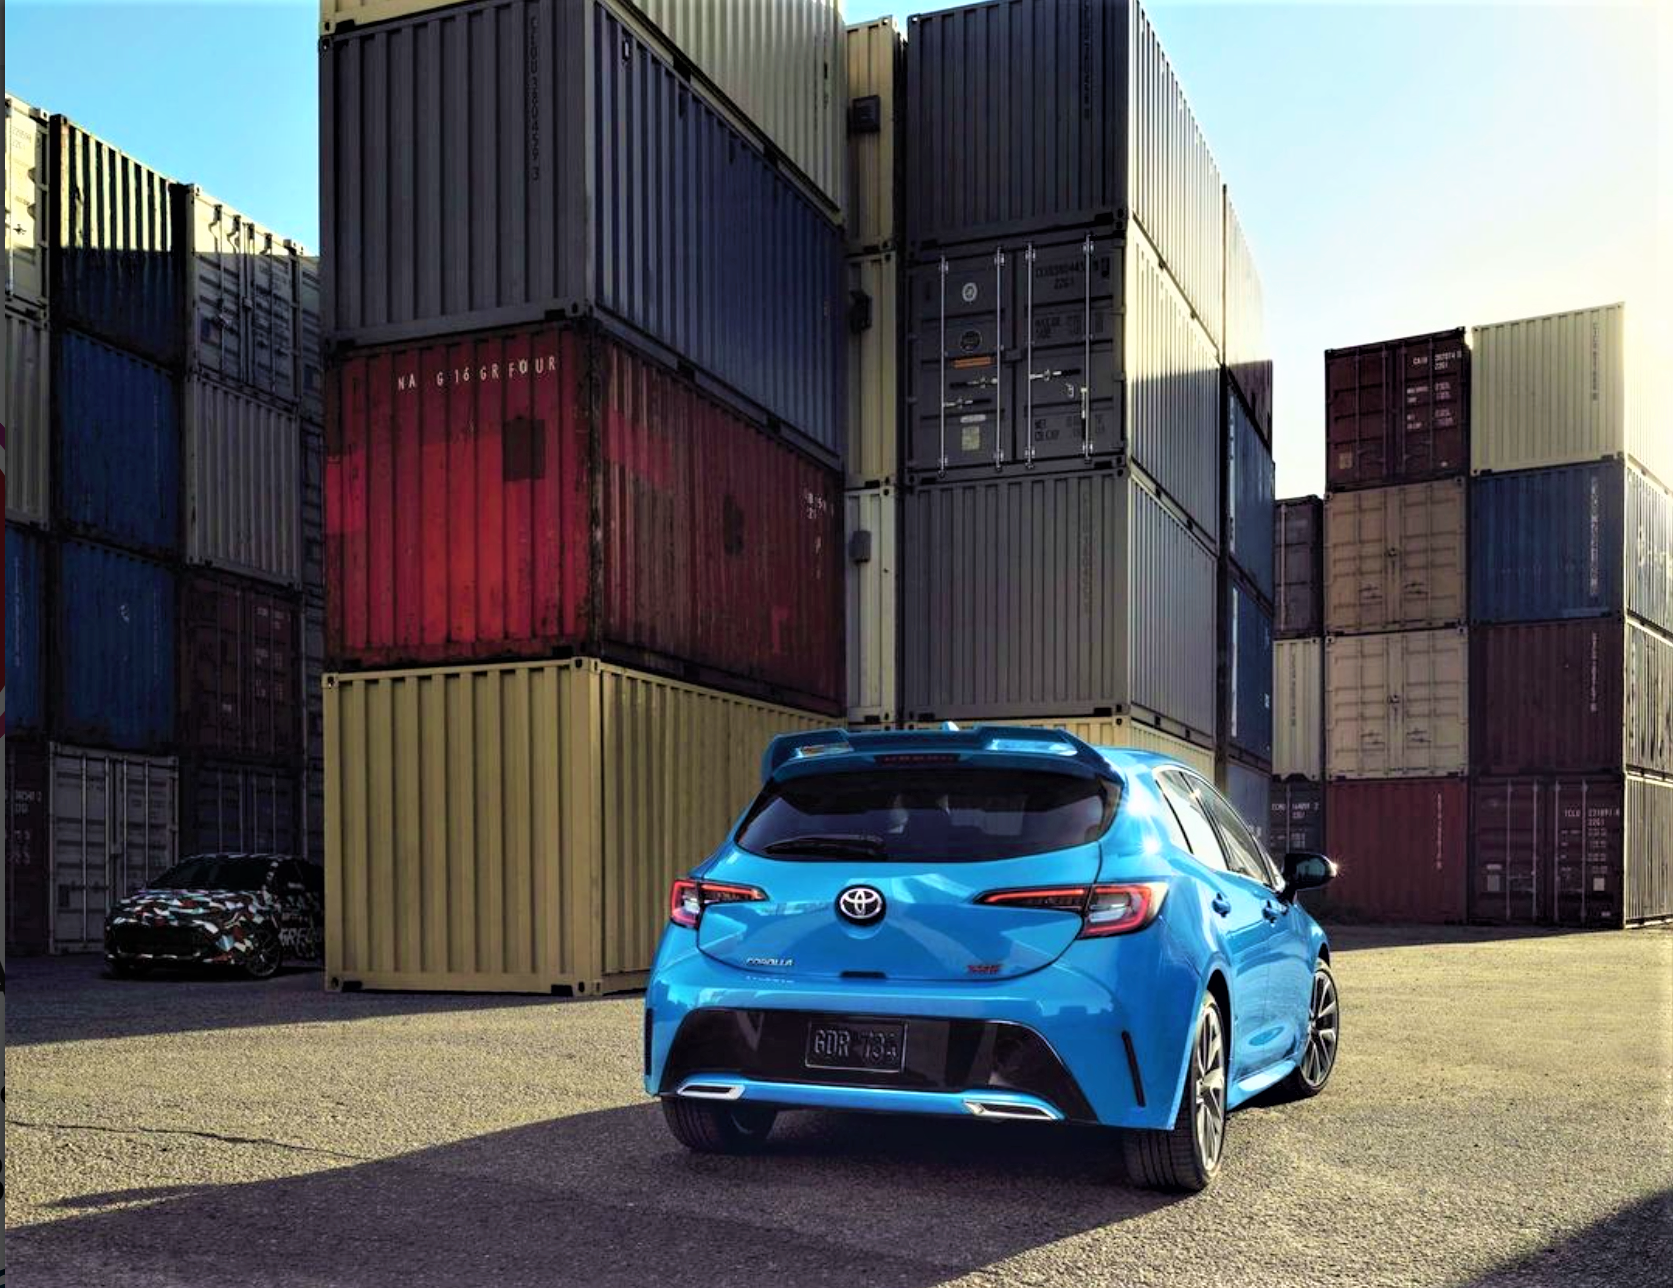 A rear 3/4 shot of a Toyota Corolla hides the new Toyota GR Corolla hot hatch in a camo livery among shipping containers